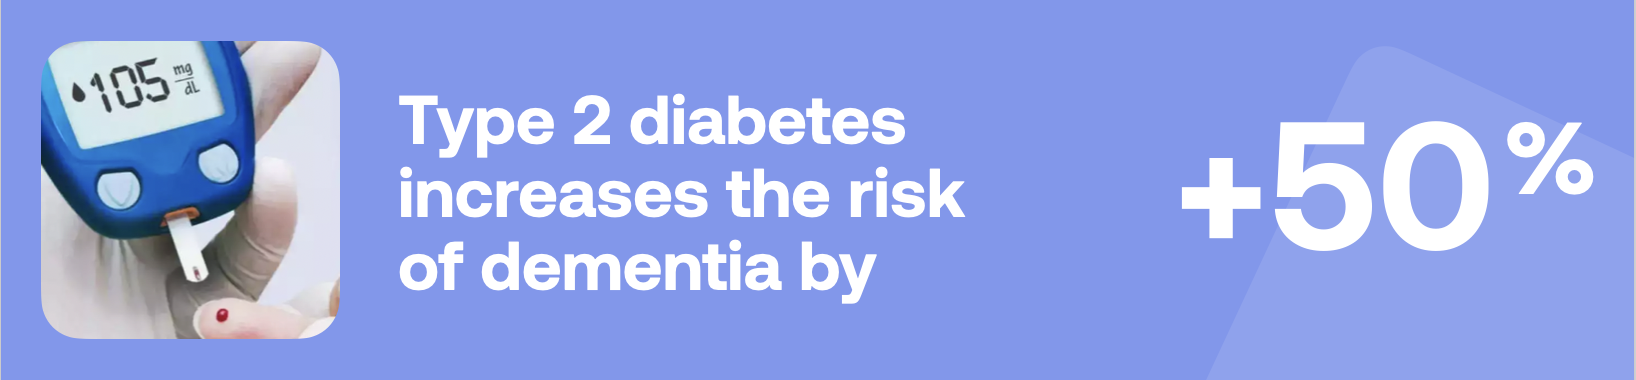 Type 2 diabetes increases the risk of dementia by +50%